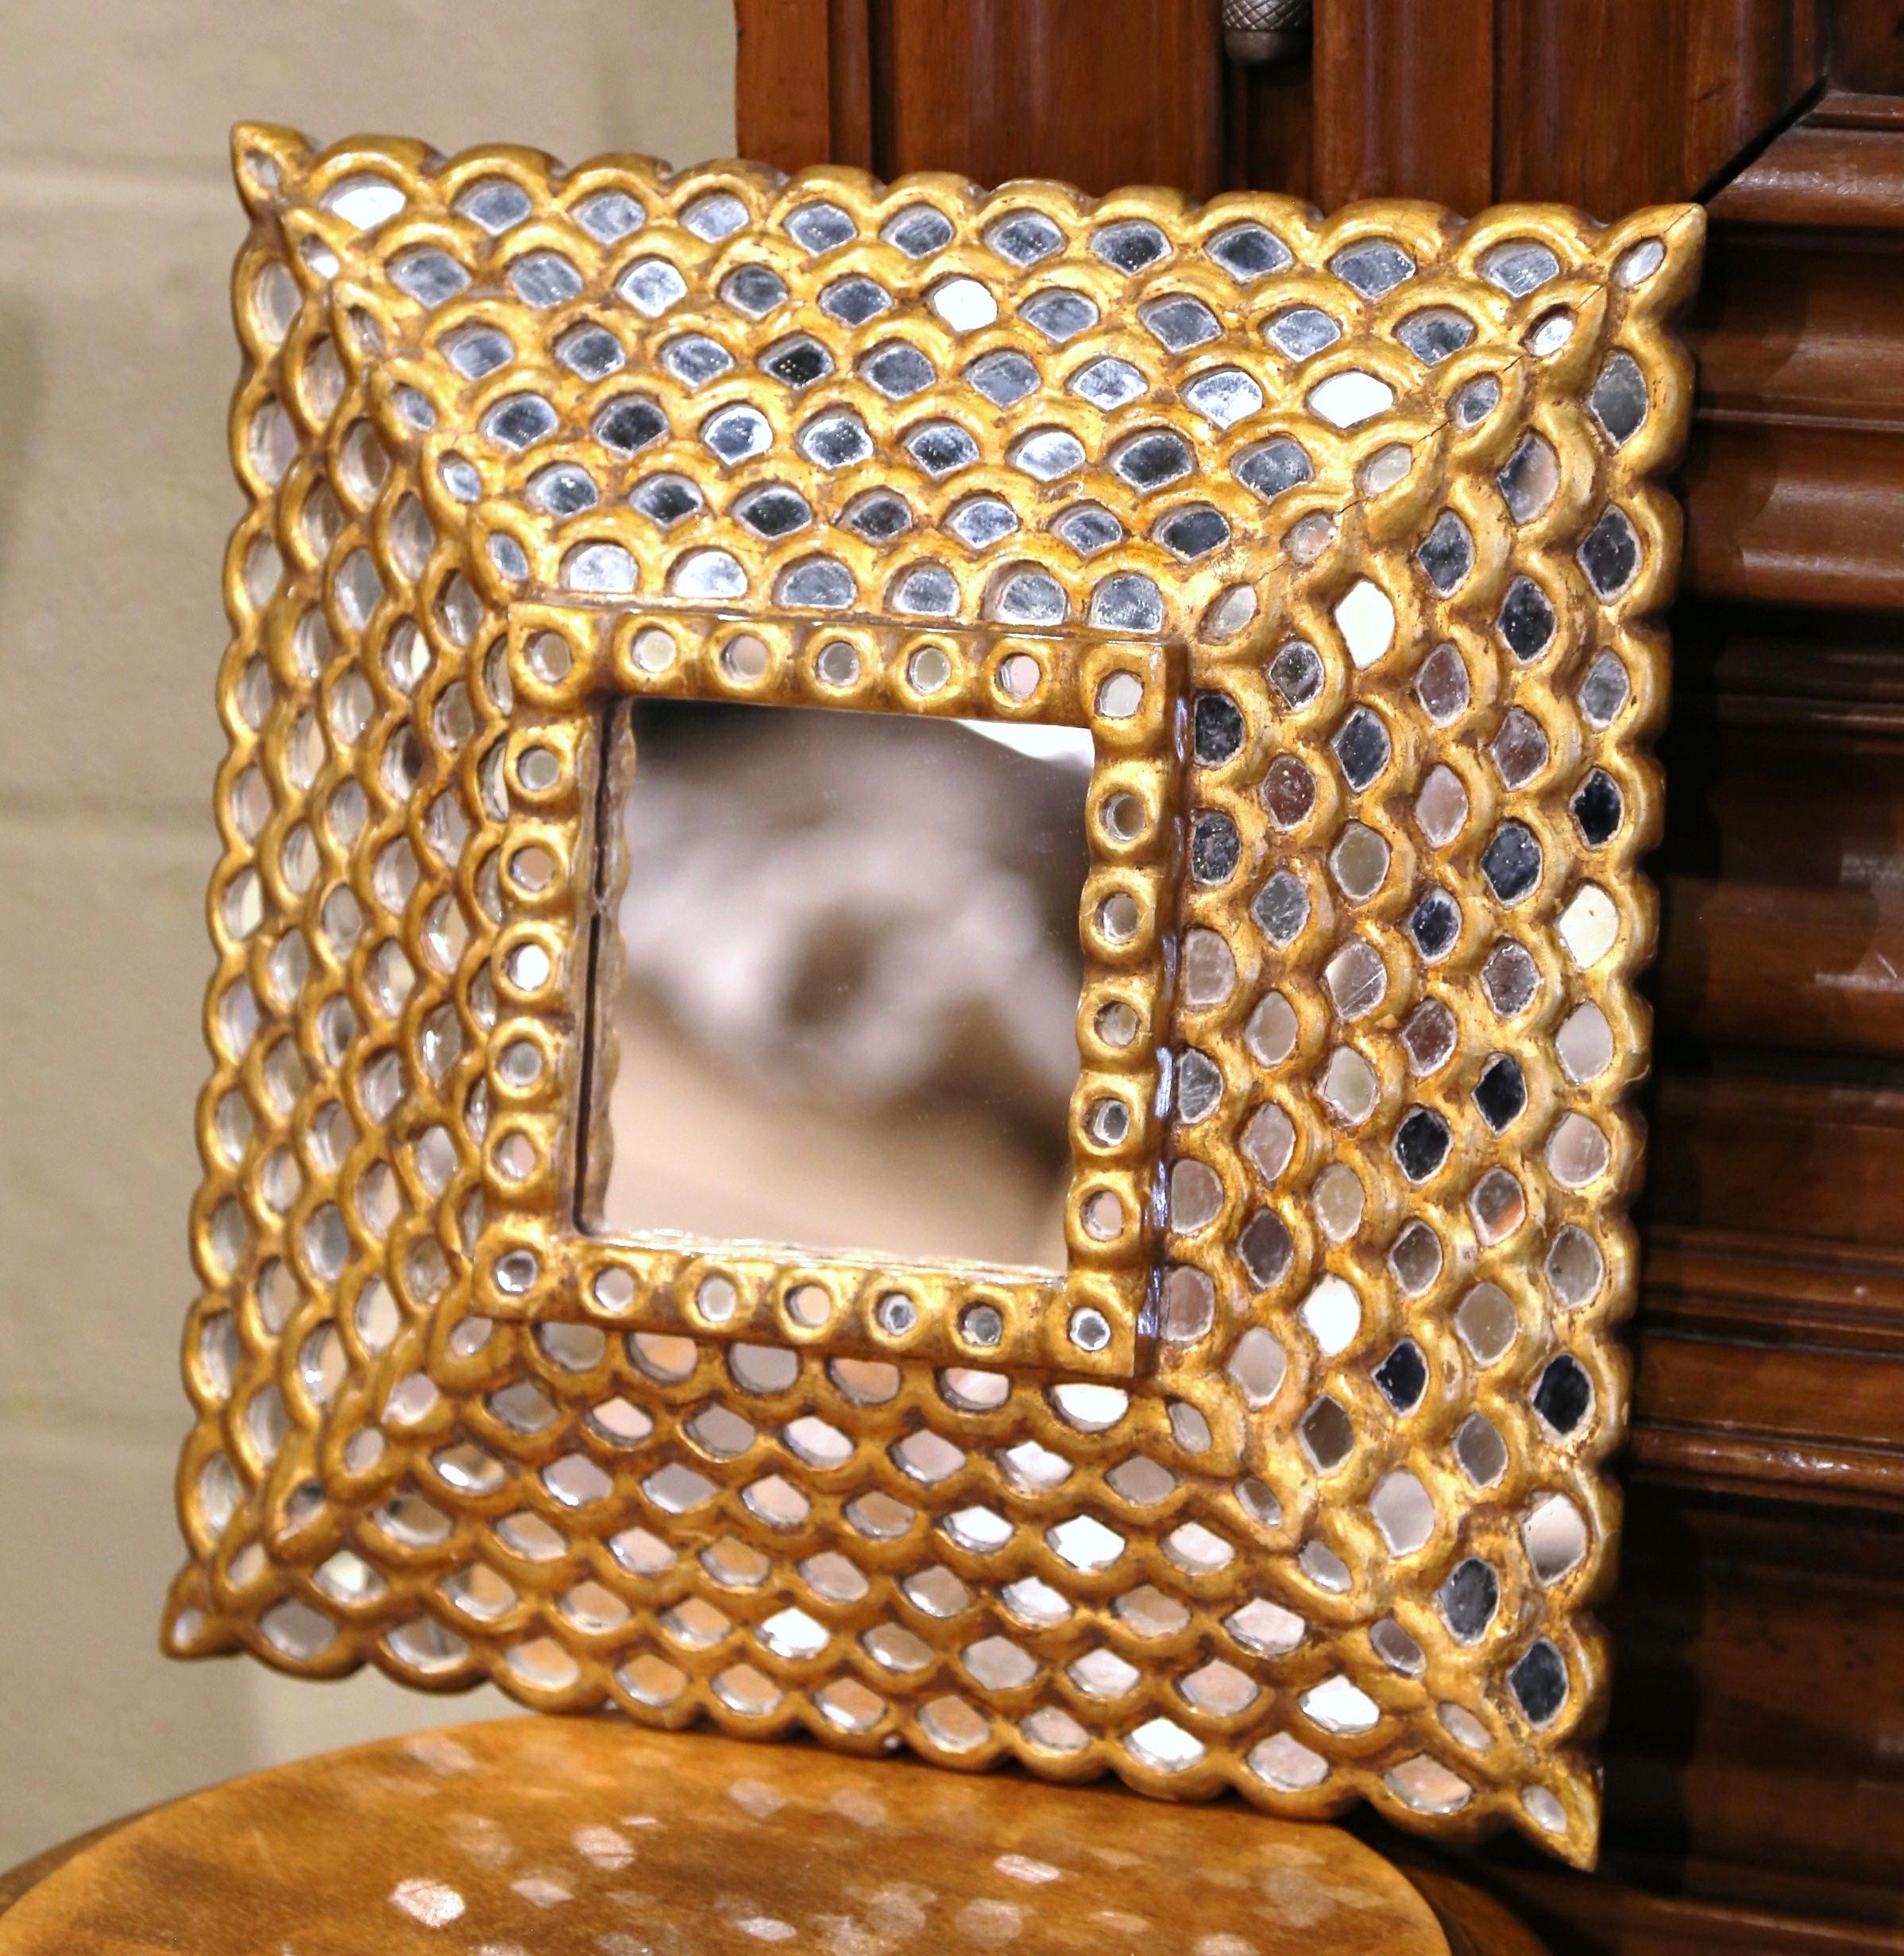 This elegant vintage sun mirror was crafted in France, circa 1930. Square in shape the antique wall mirror features a raised square center mercury glass set inside a carved frame; the four sides are decorated with small overlay mirrored insets. The